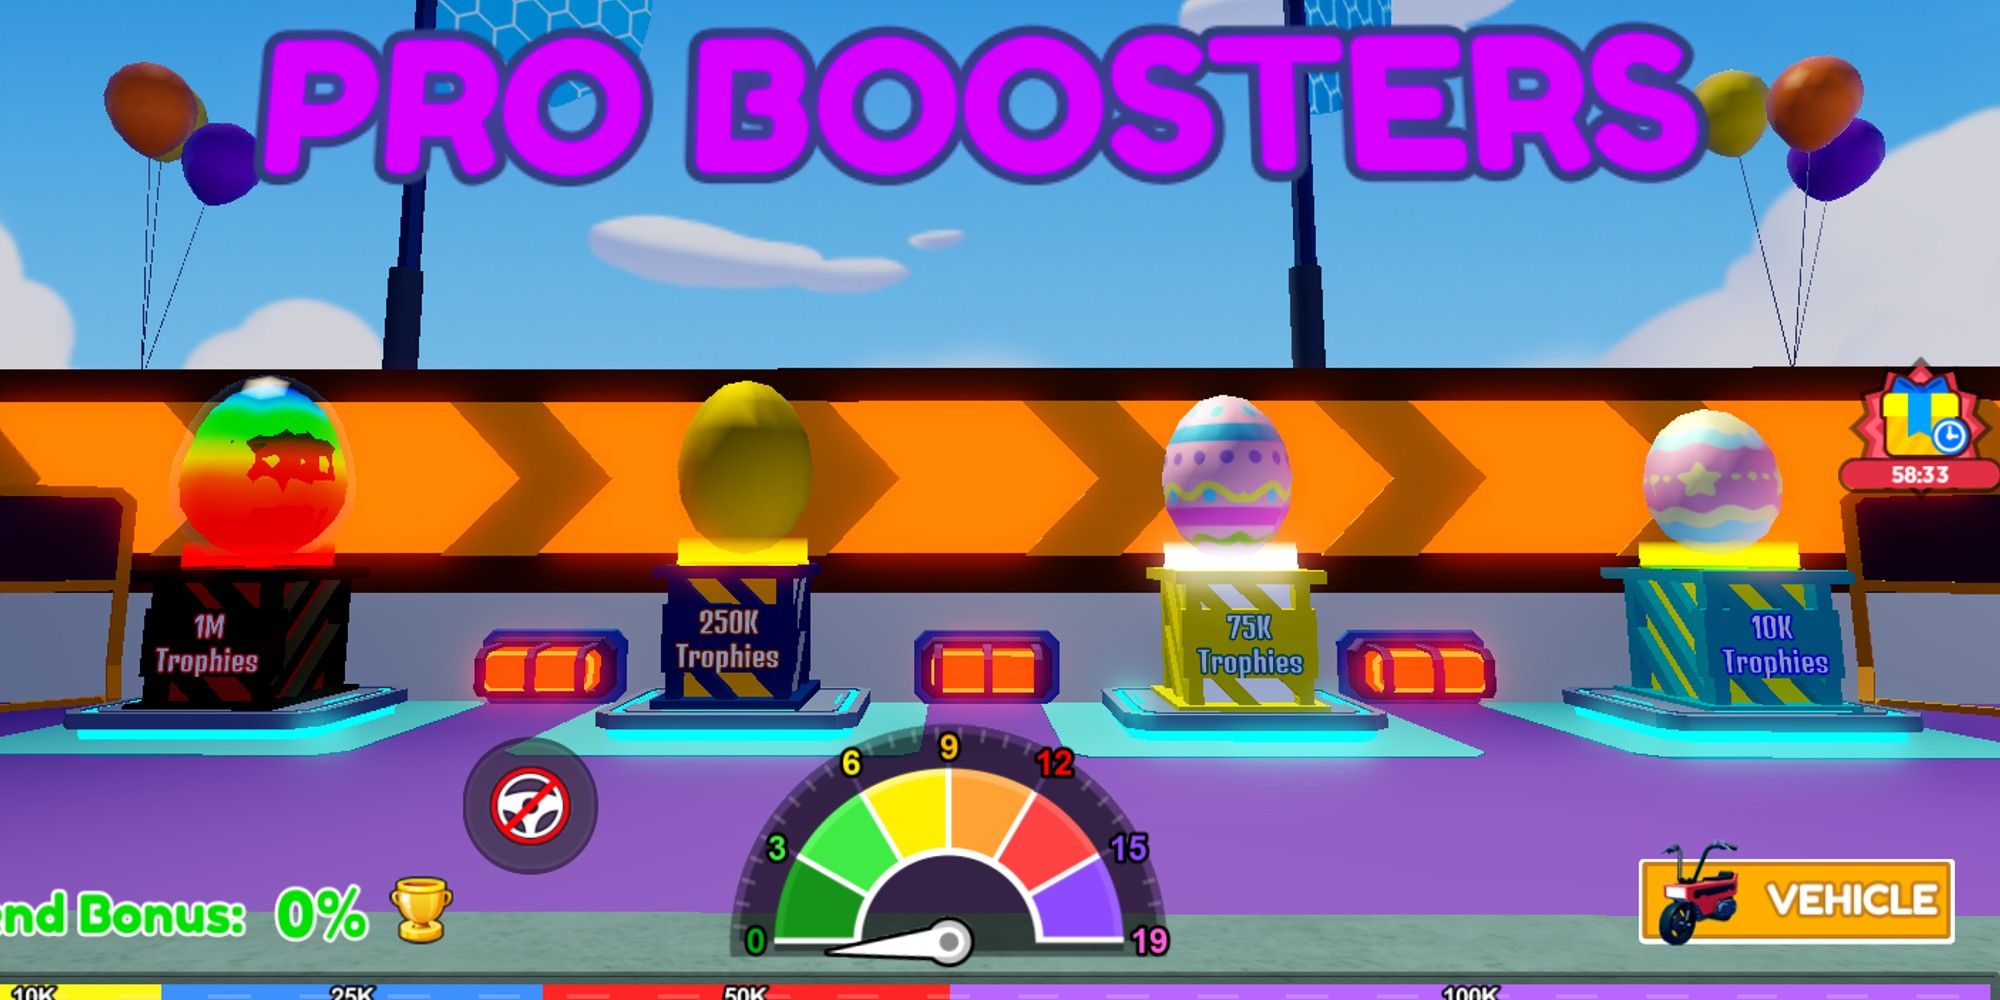 Max Speed Boosters